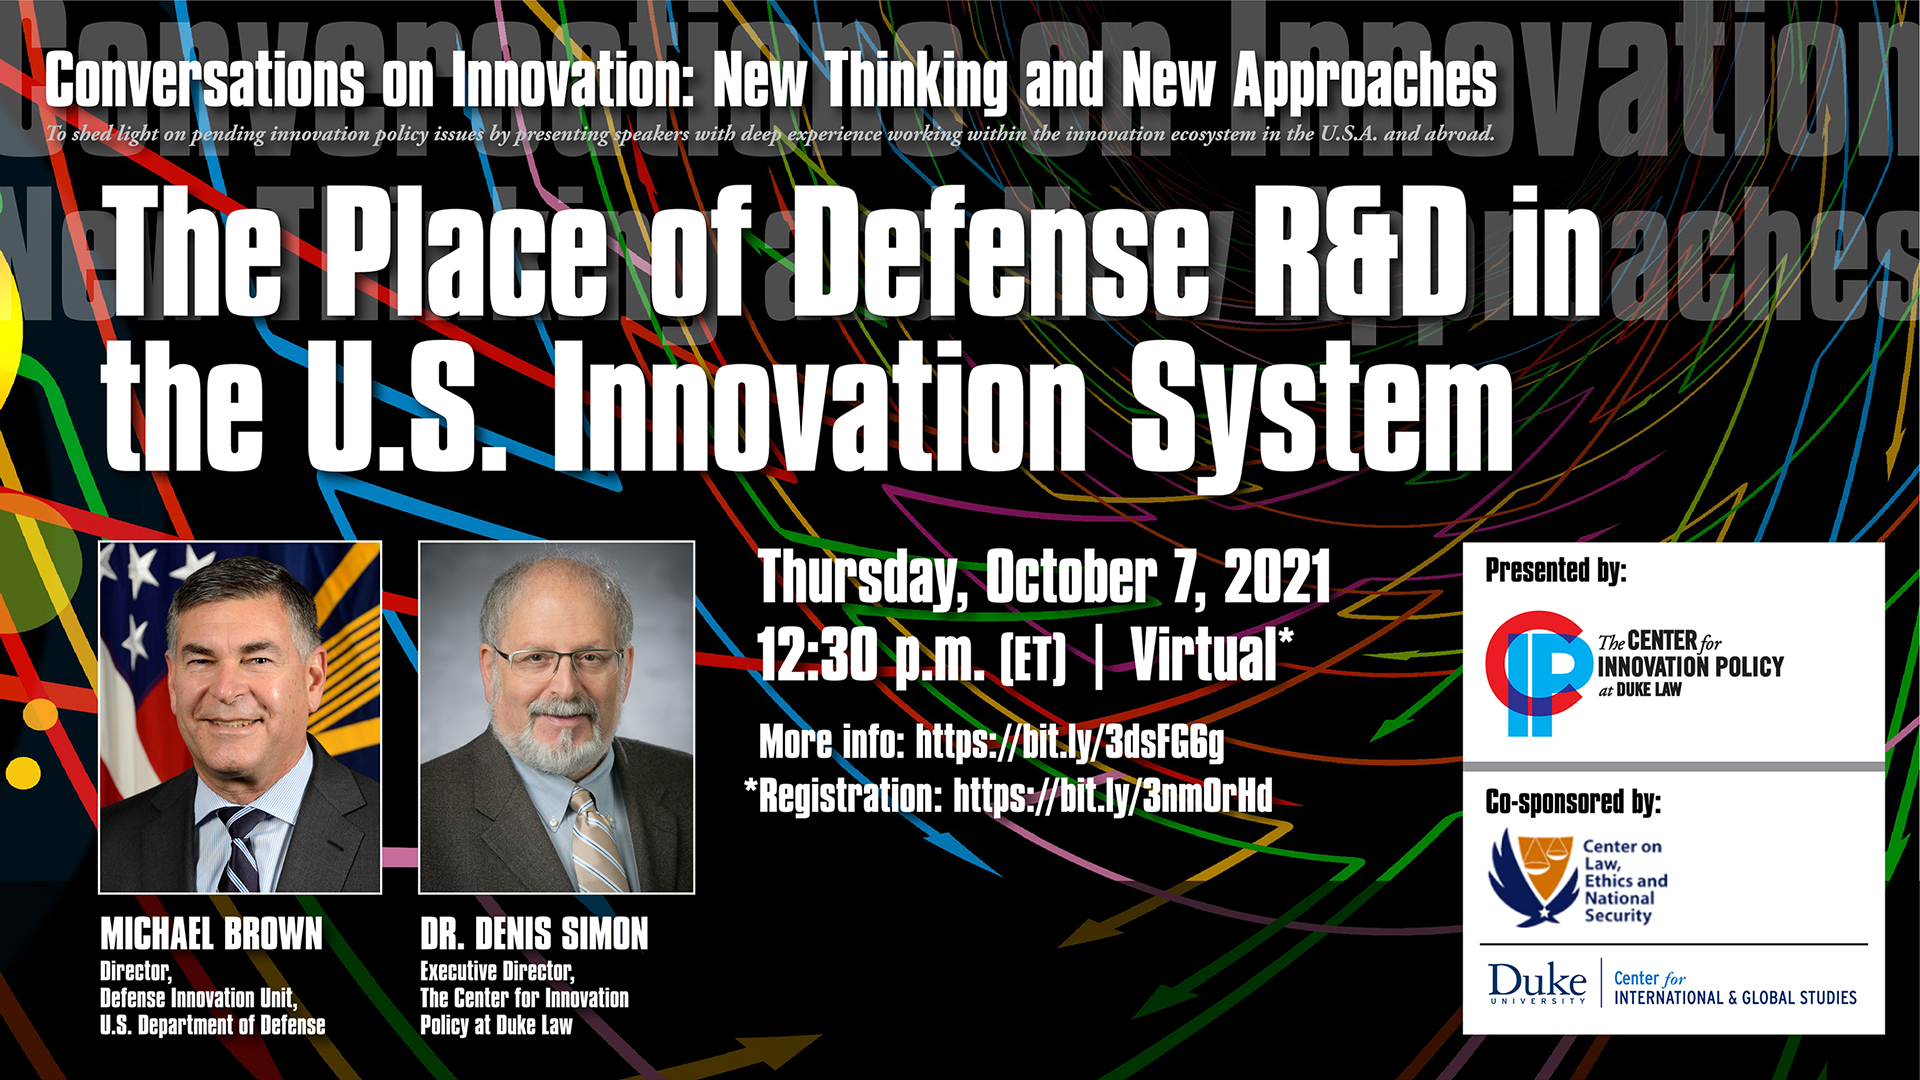 Conversations on Innovation -- The Place of Defense R&D in the U.S. Innovation System with Michael Brown and Denis Simon